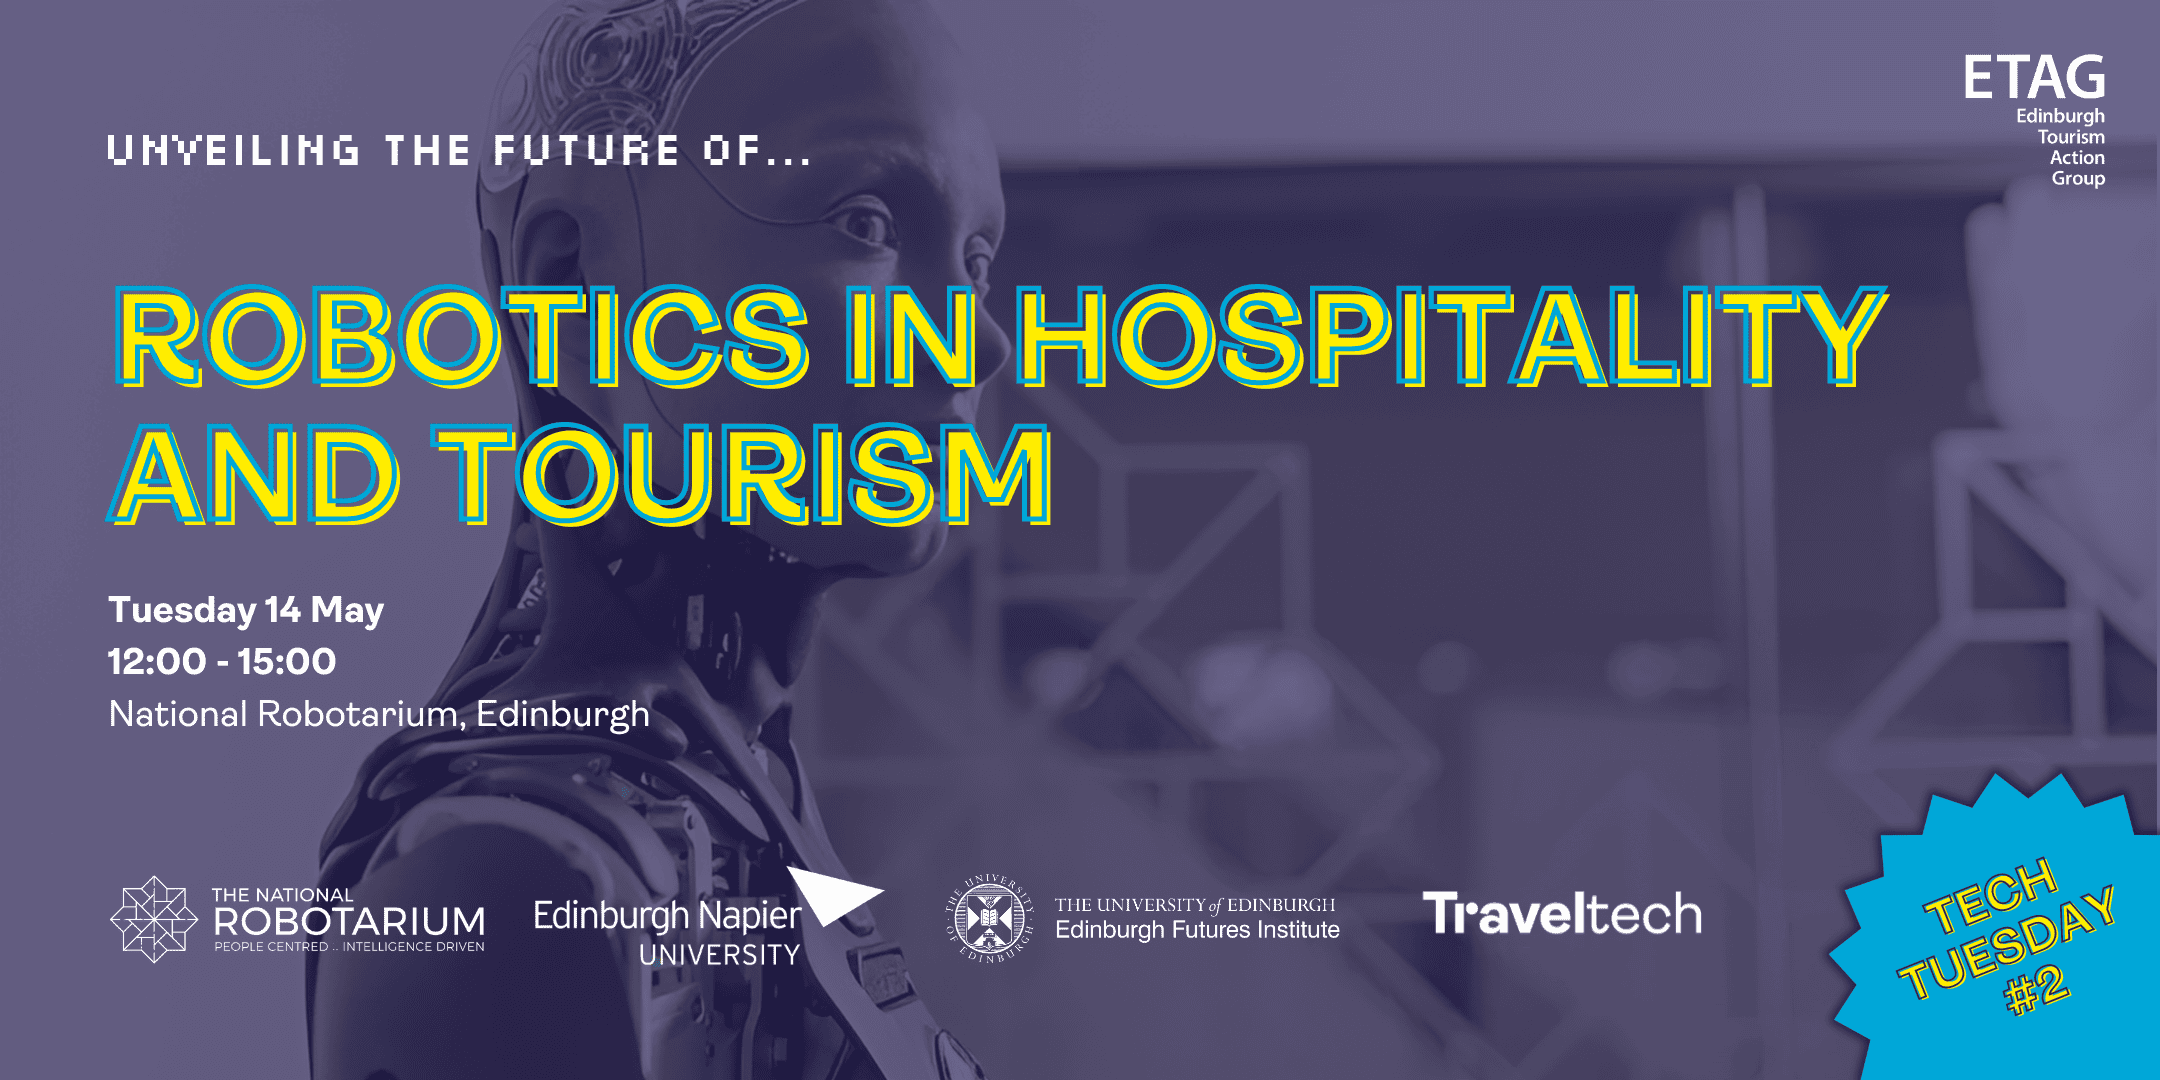 A promotional graphic for an event titled "Robotics in Hospitality and Tourism." The event is on Tuesday 14 May, from 12:00 to 15:00 at the National Robotarium, Edinburgh. The graphic features a humanoid robot and logos of associated organizations.